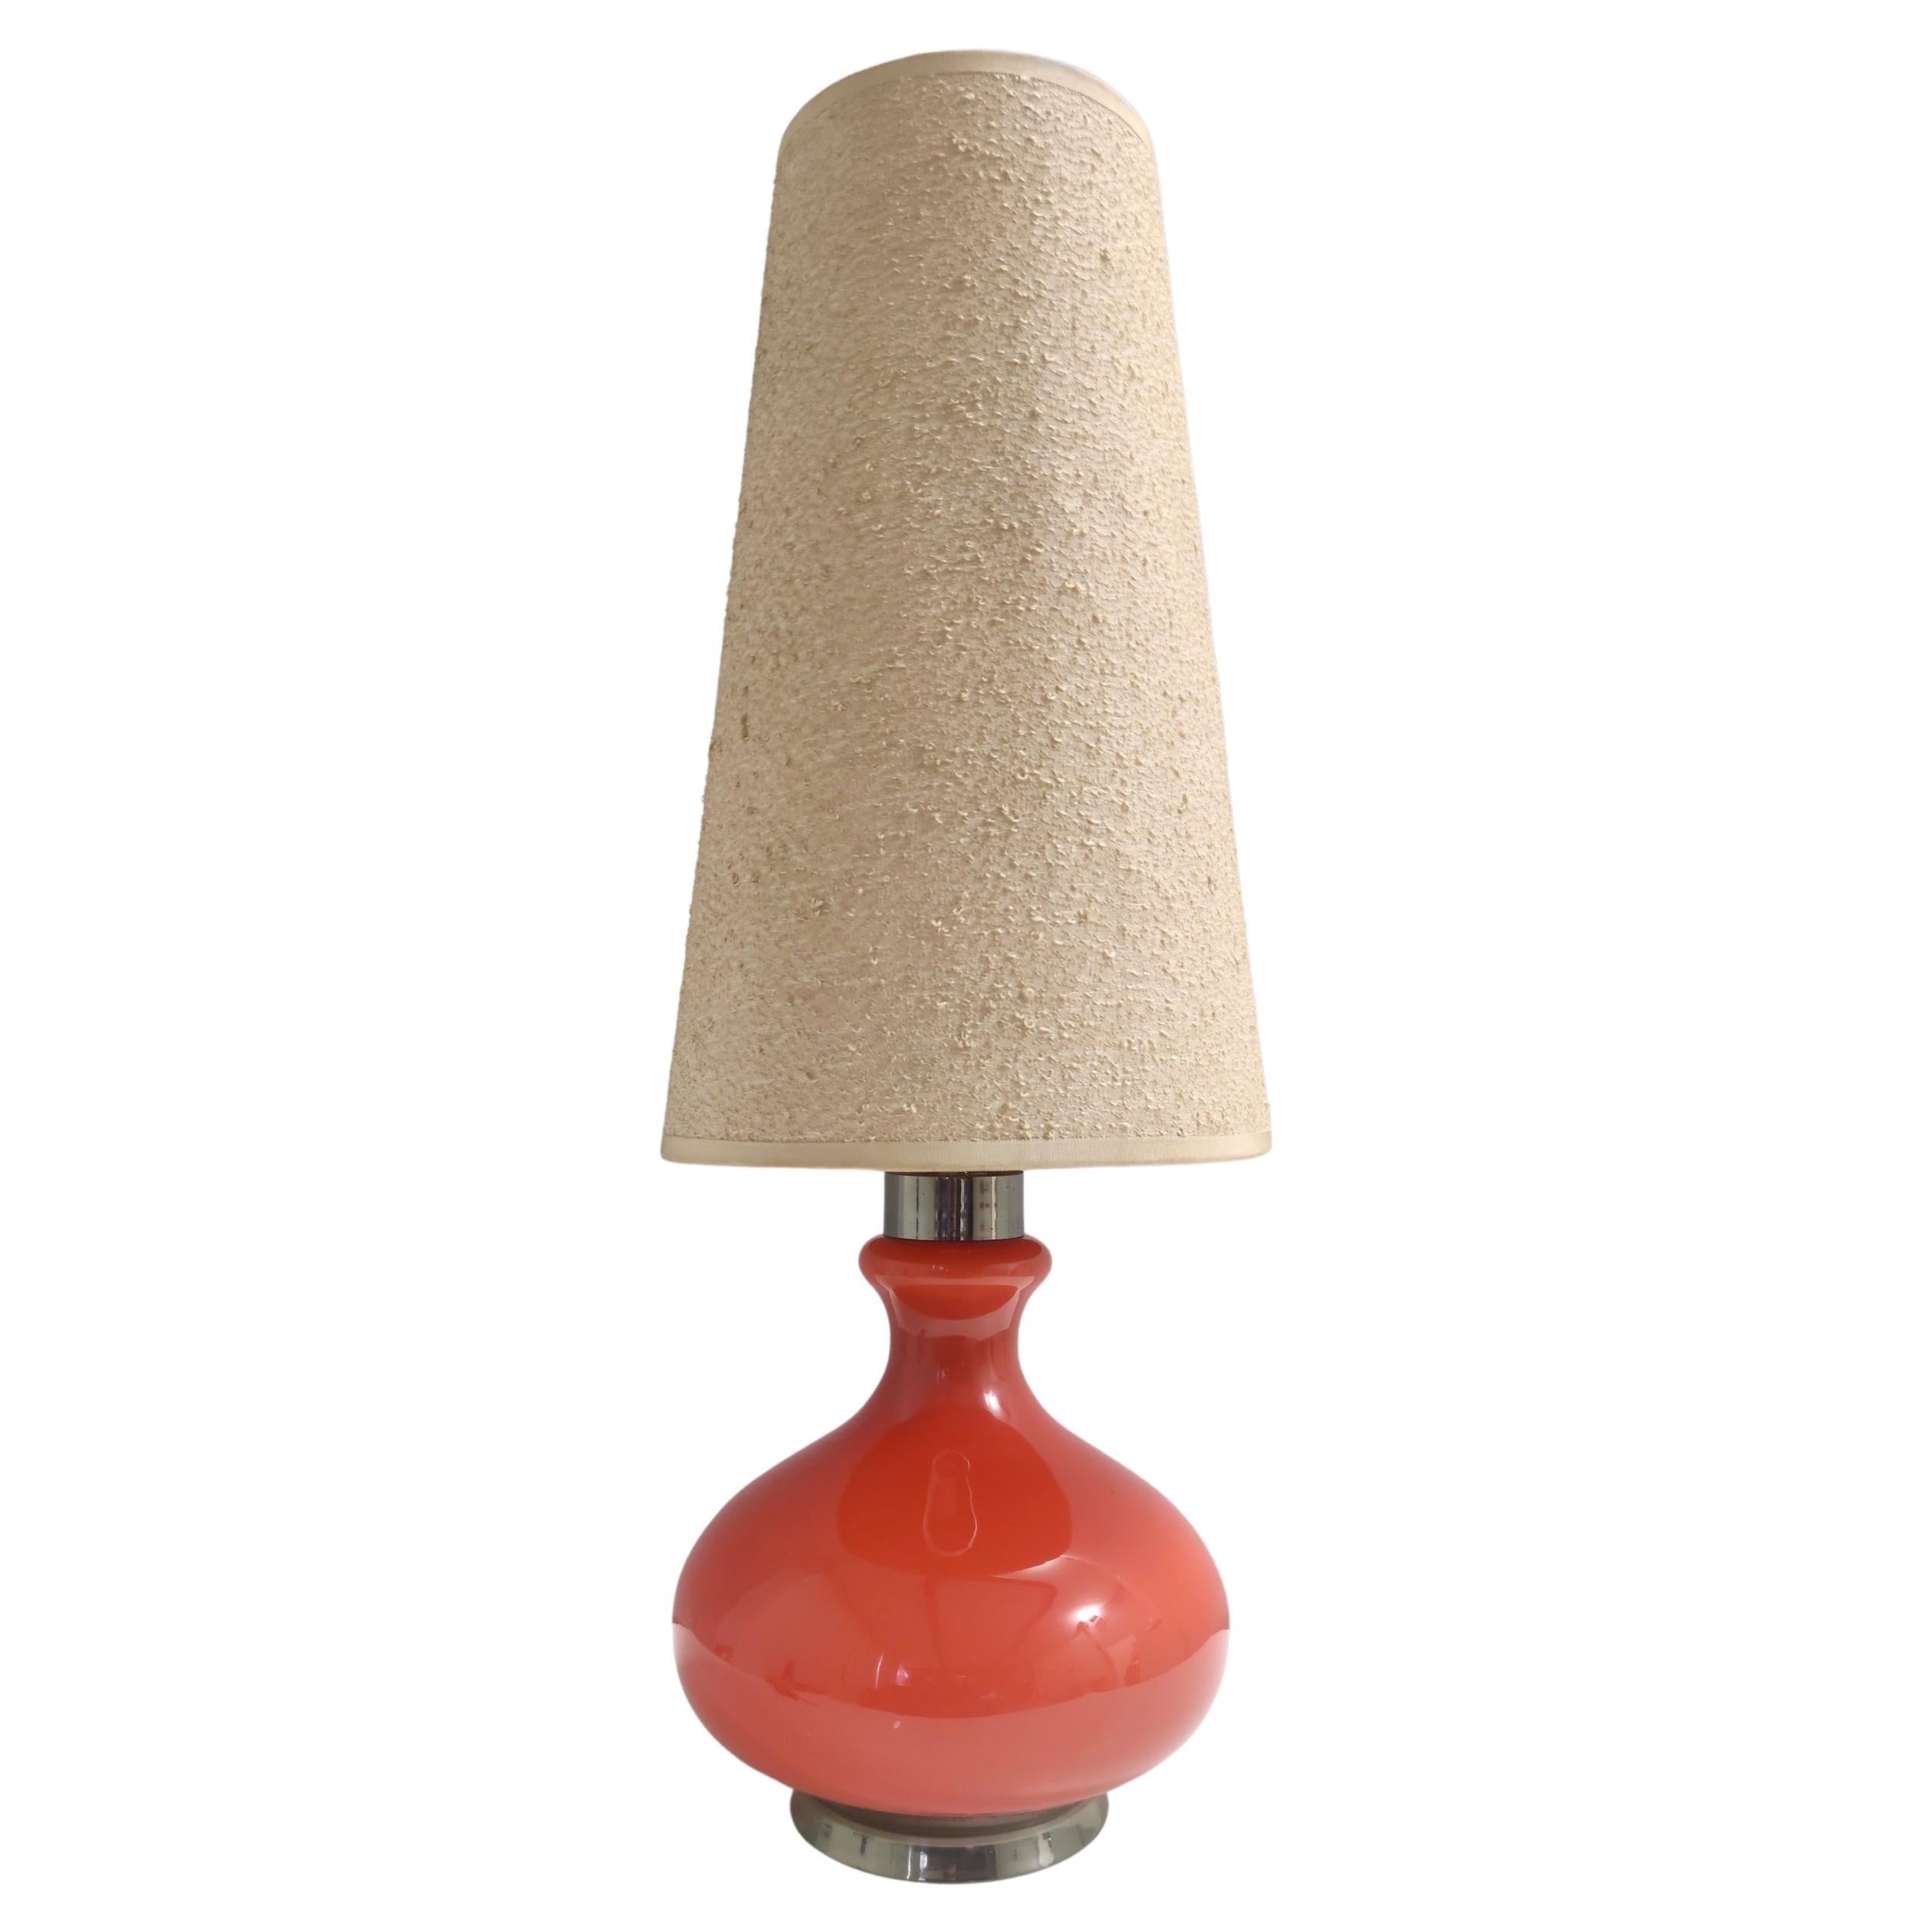 Large and Uncommon Postmodern Orange Table Lamp by Carlo Nason, Murano, Italy